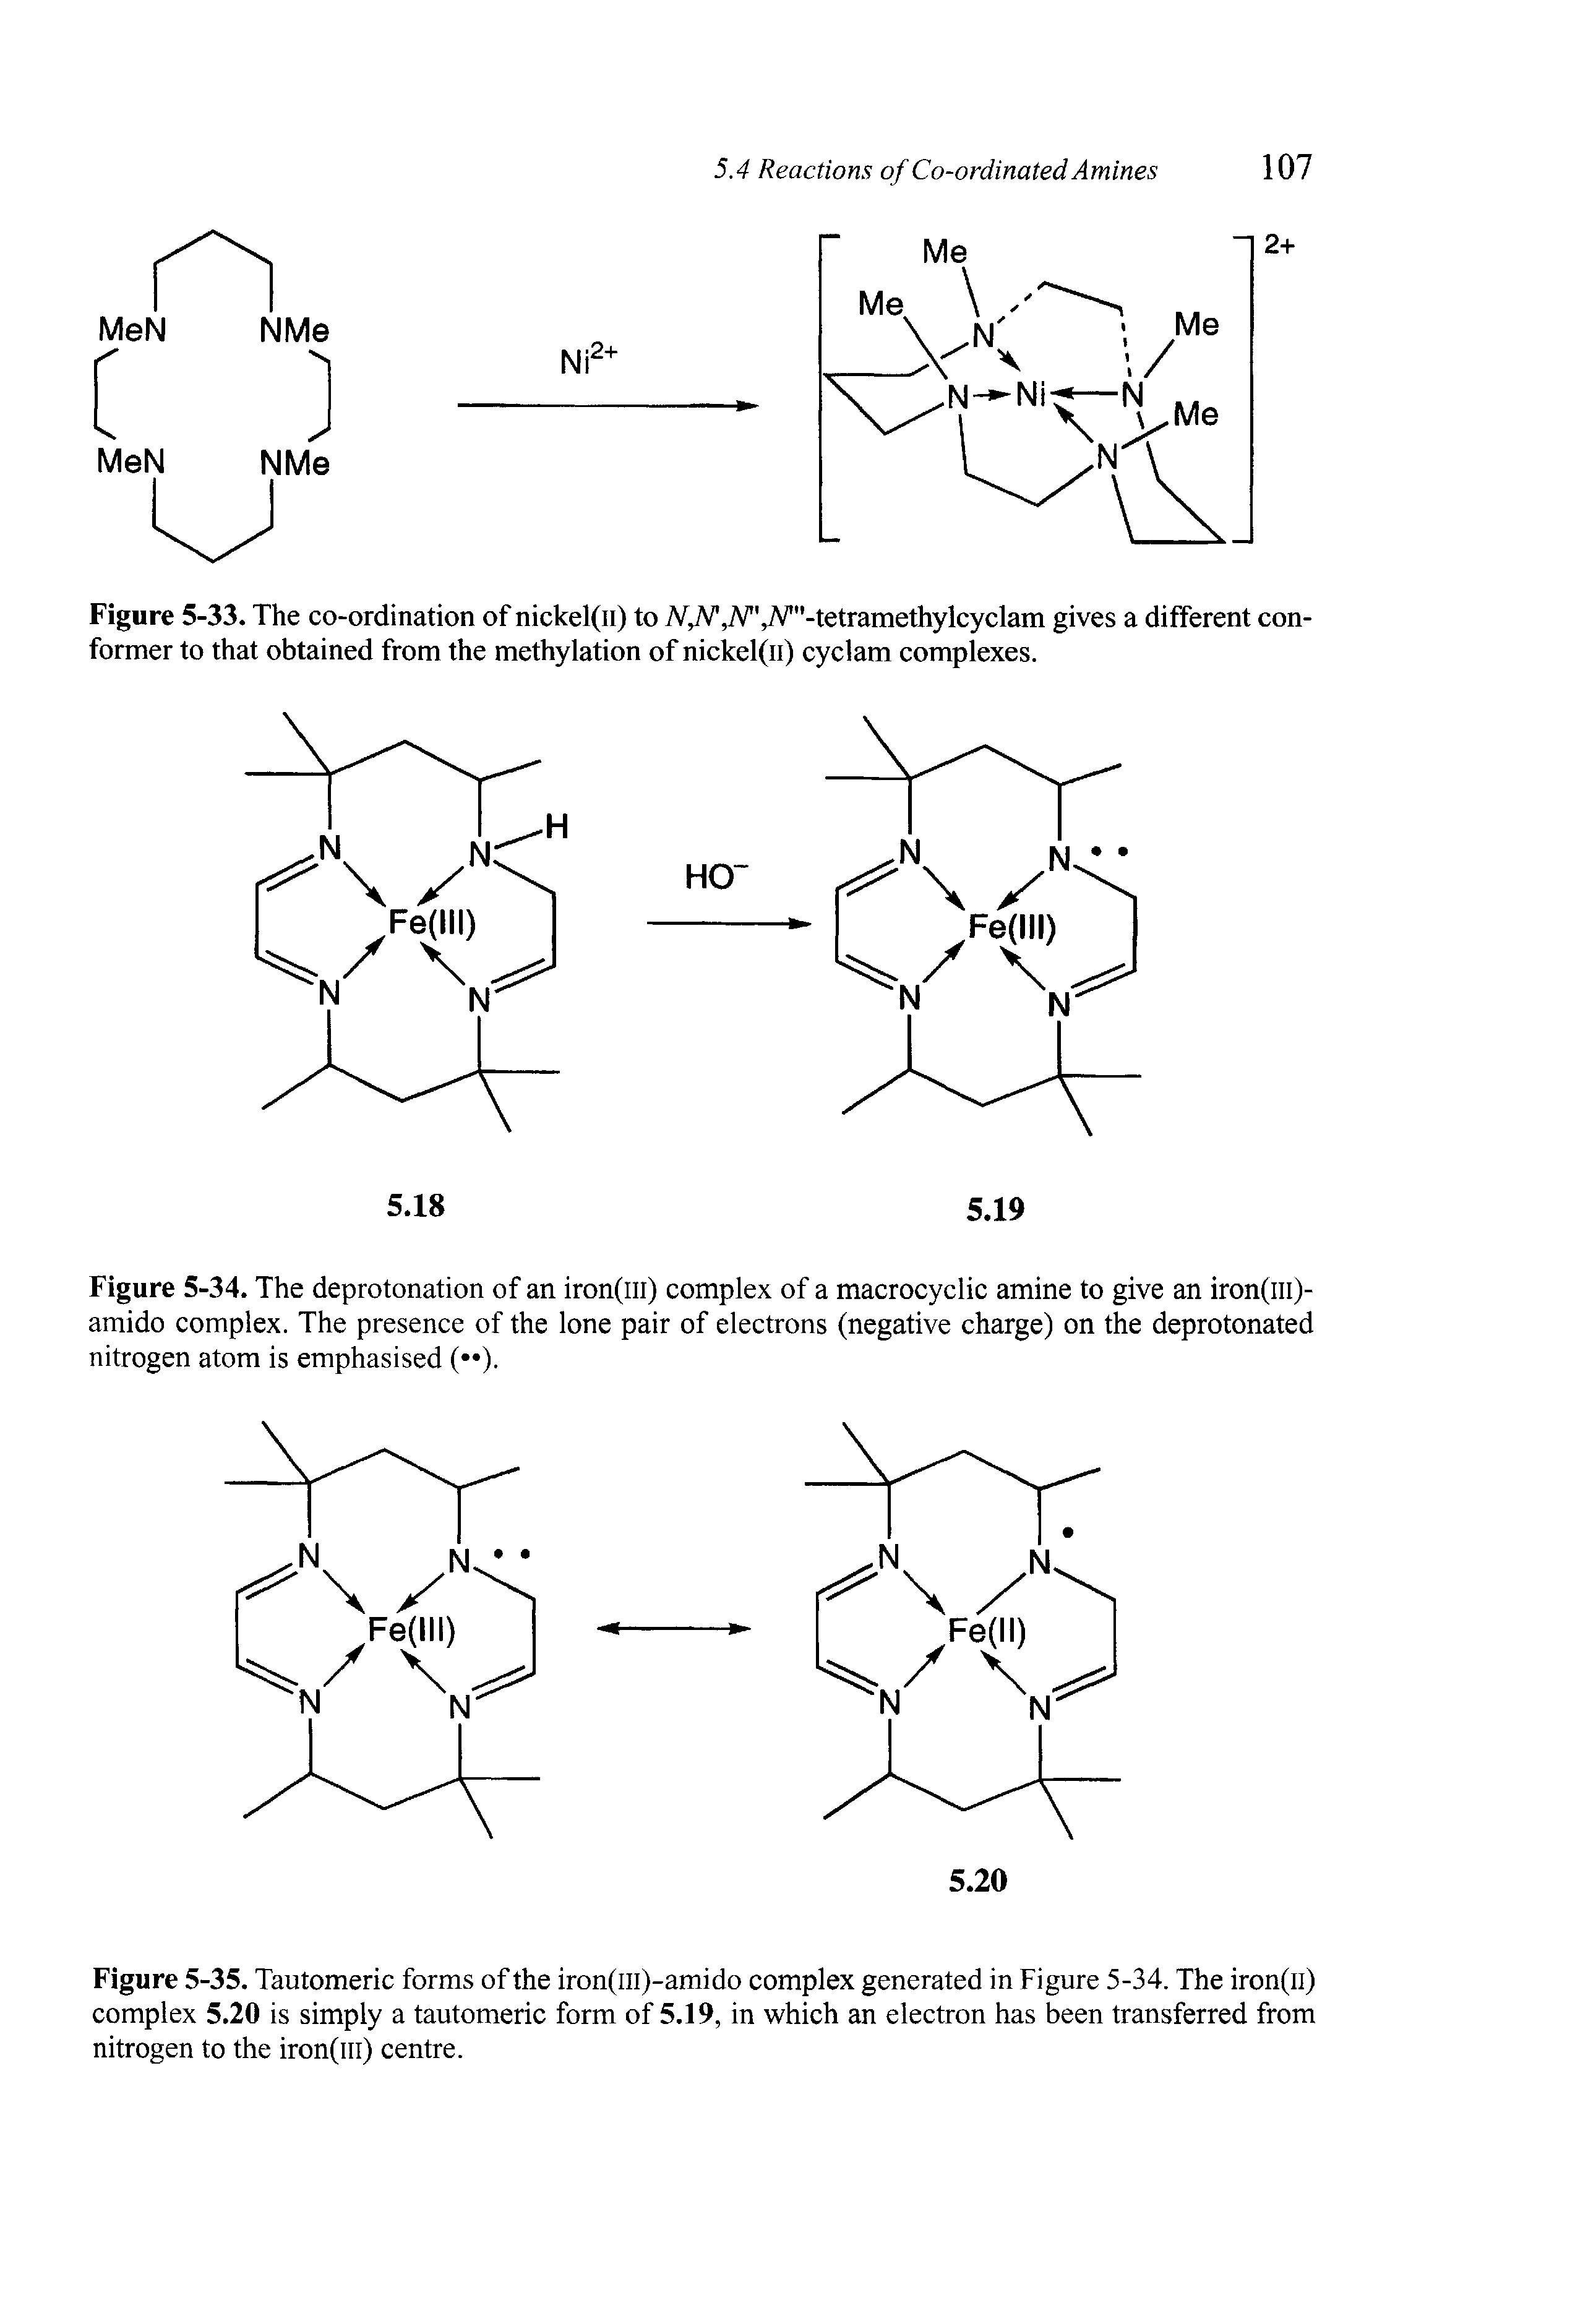 Figure 5-33. The co-ordination of nickel(n) to /V A A -tetramethylcyclam gives a different con-former to that obtained from the methylation of nickel(n) cyclam complexes.